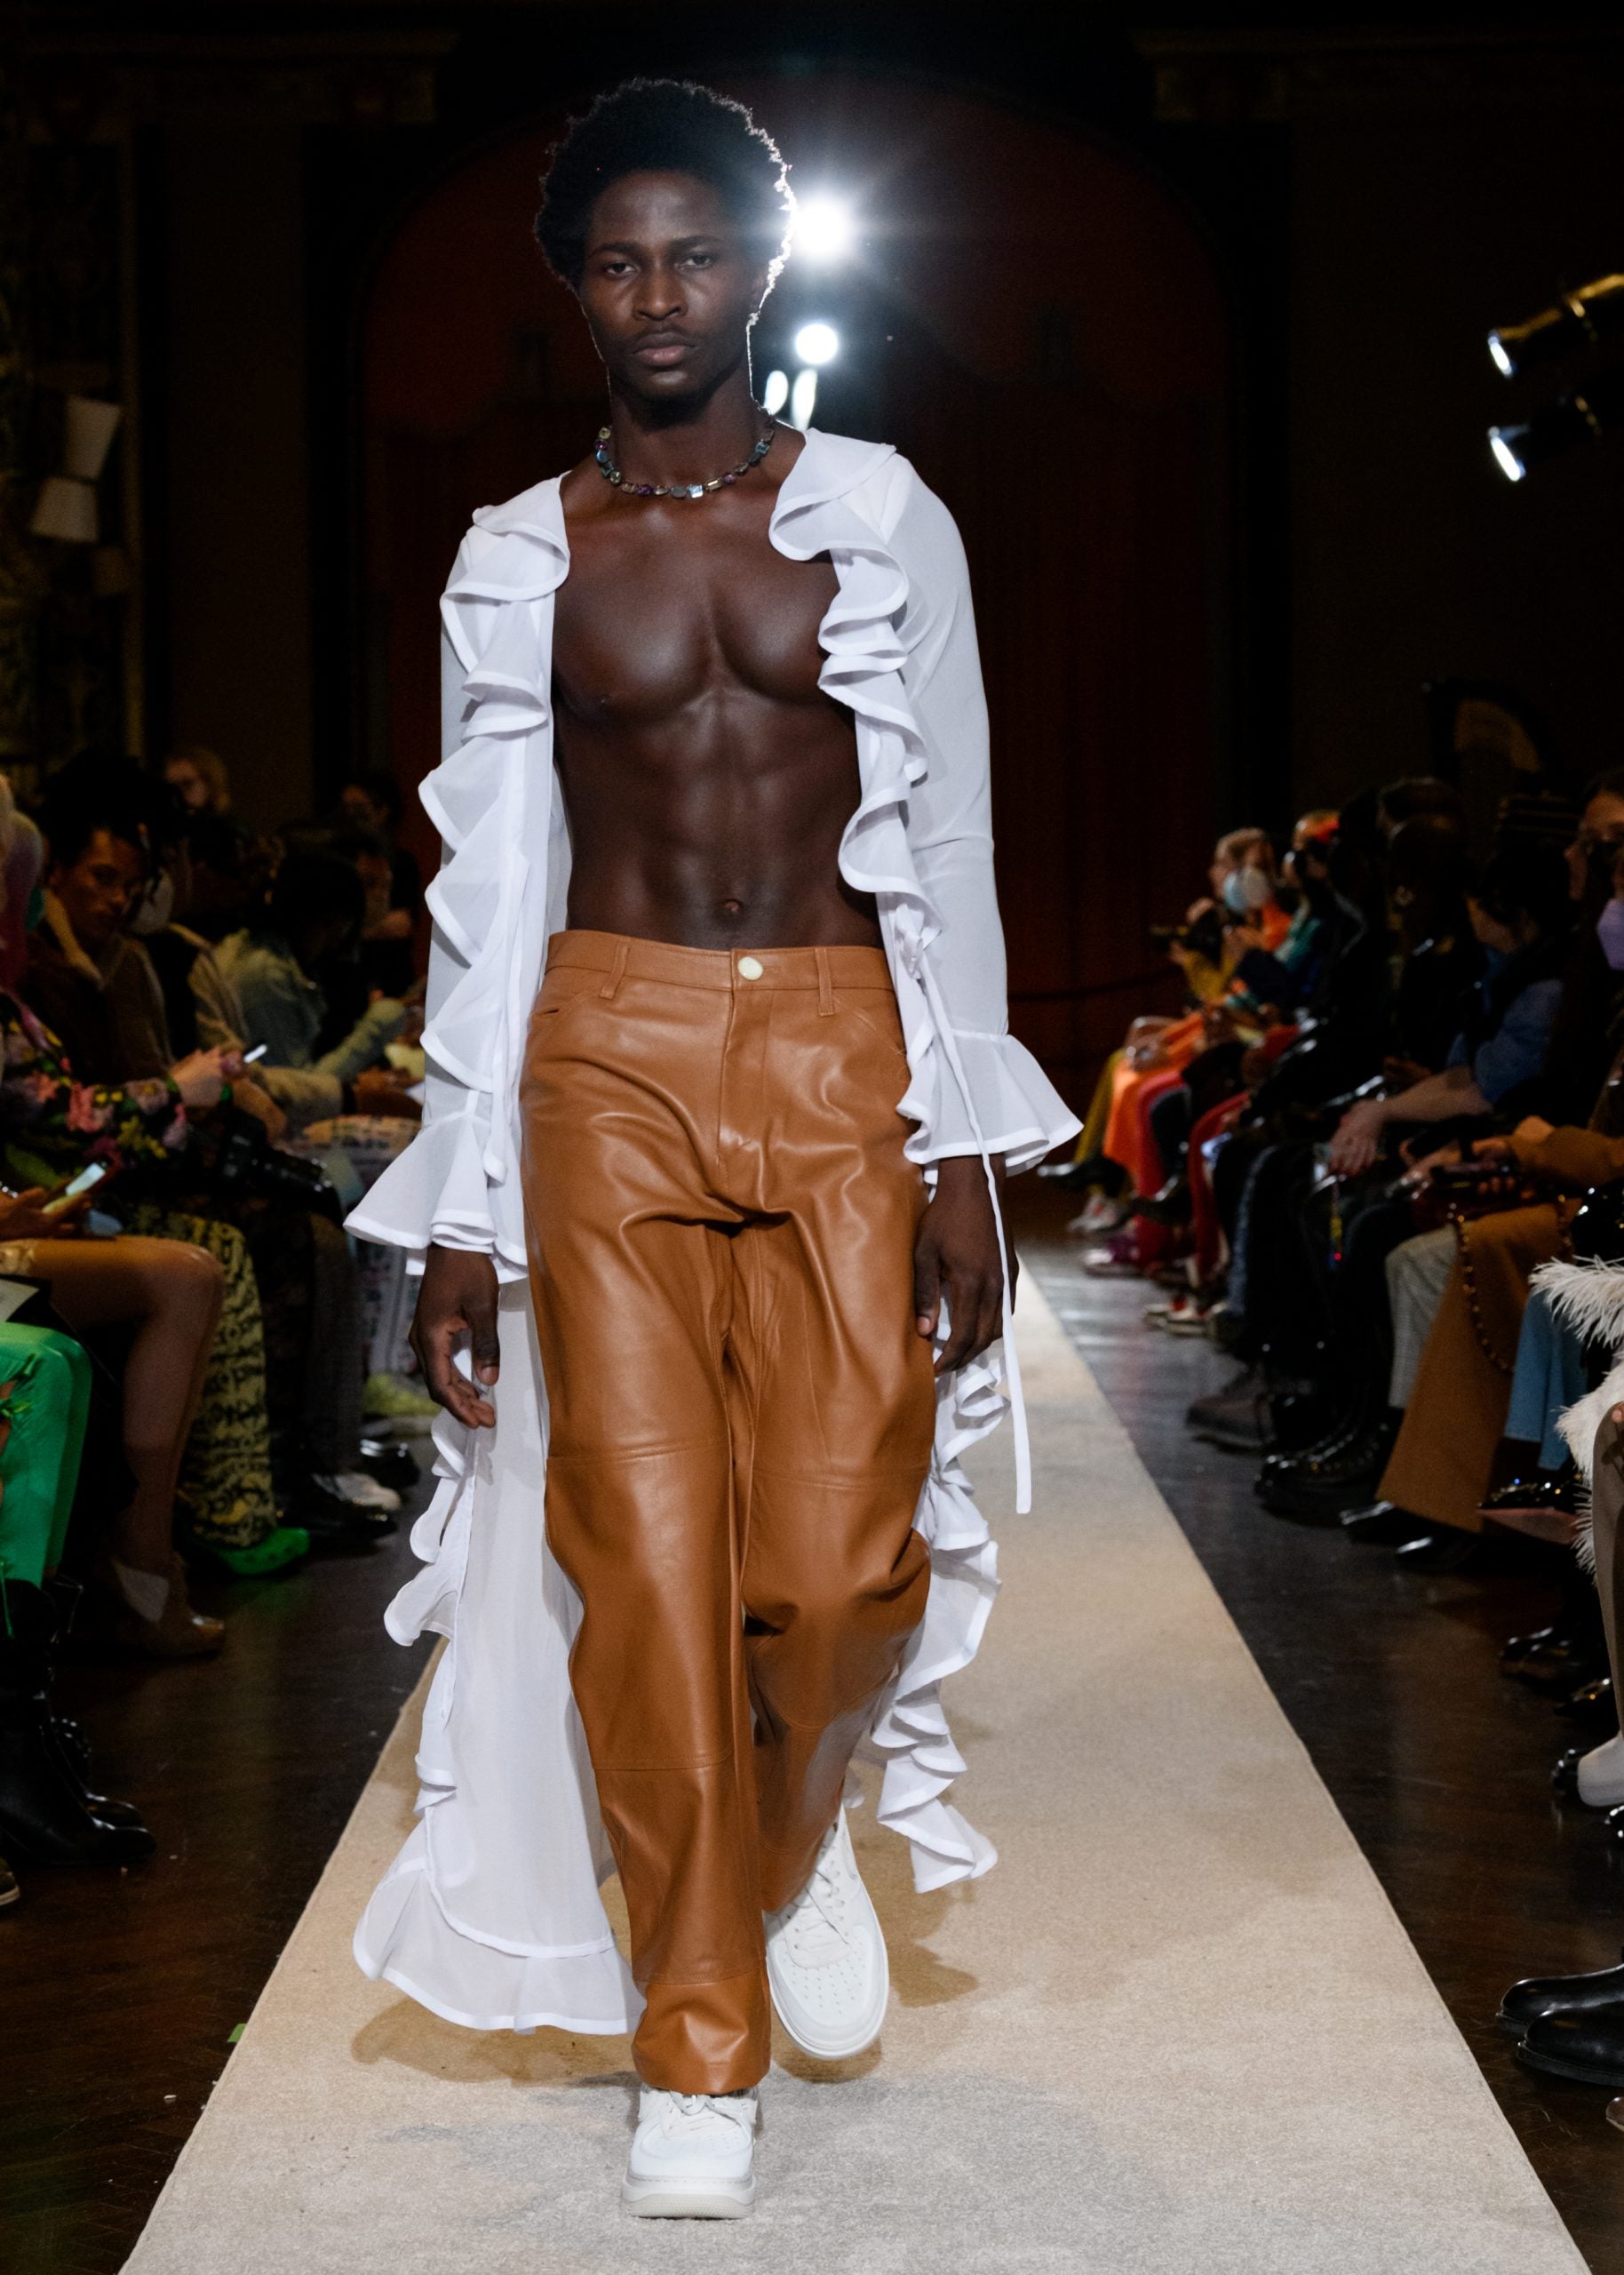 Tia Adeola Returns To NYFW And Presents Menswear For The First Time